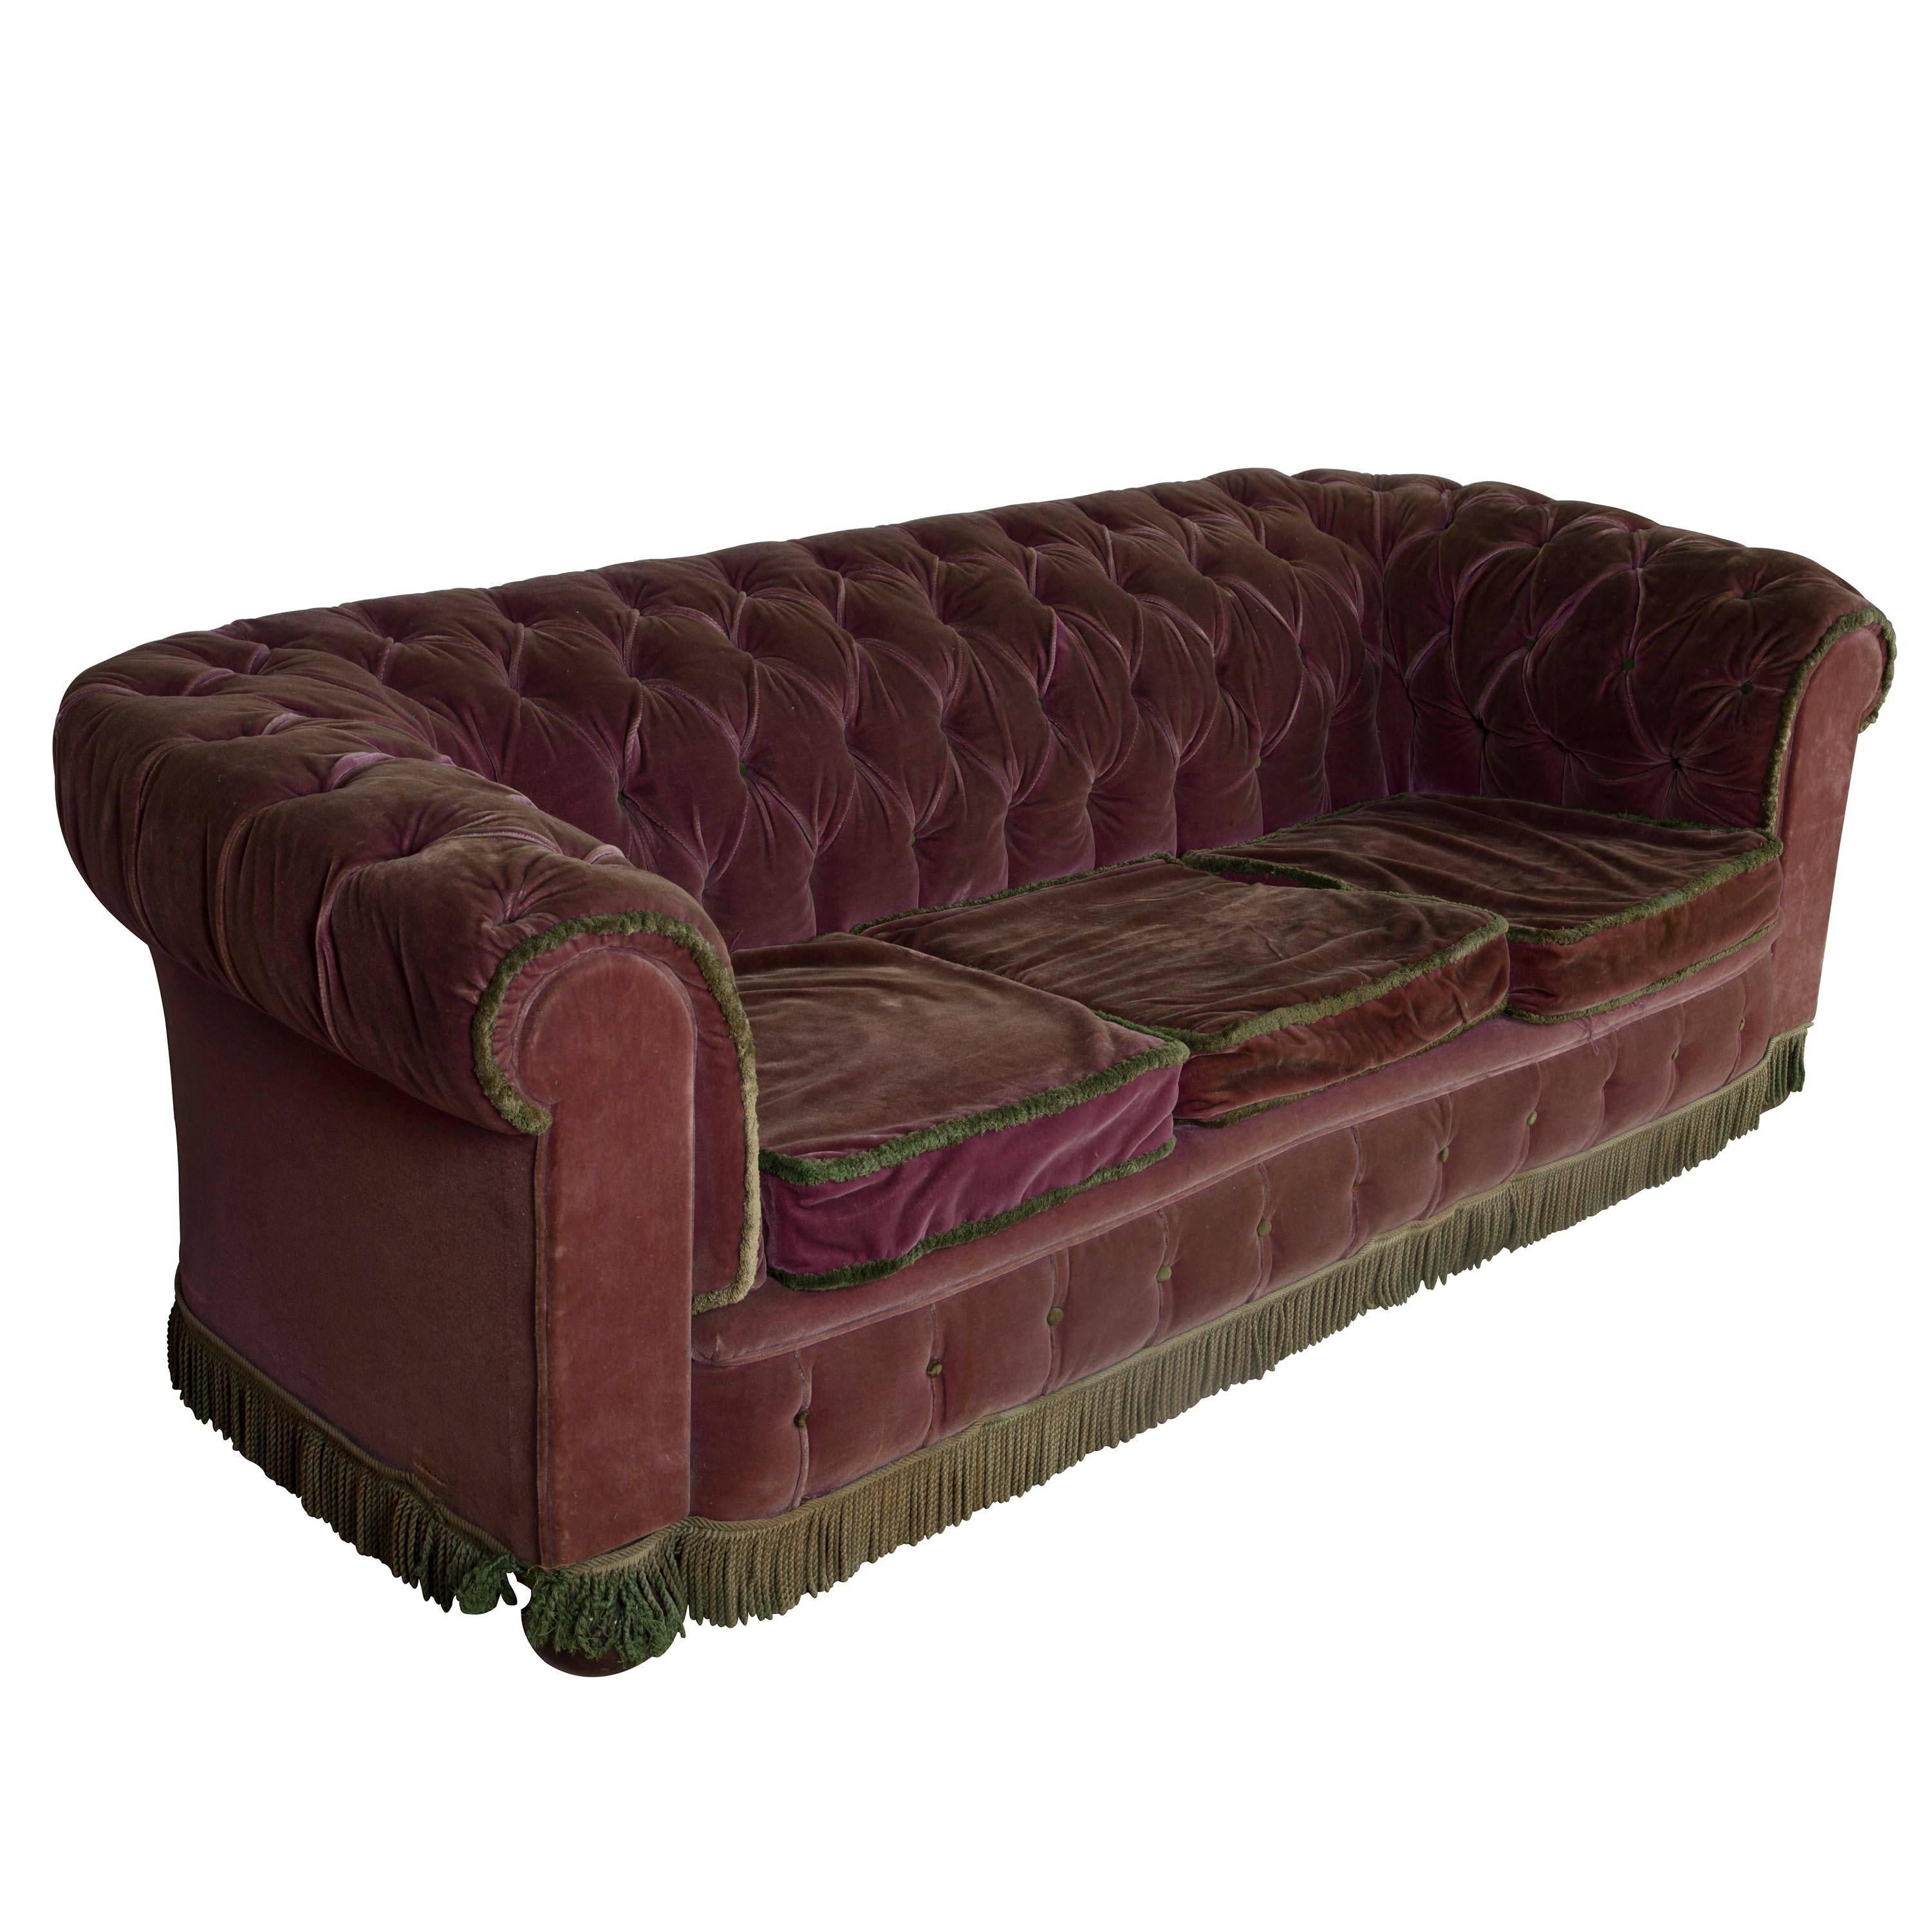 A country house Chesterfield sofa.